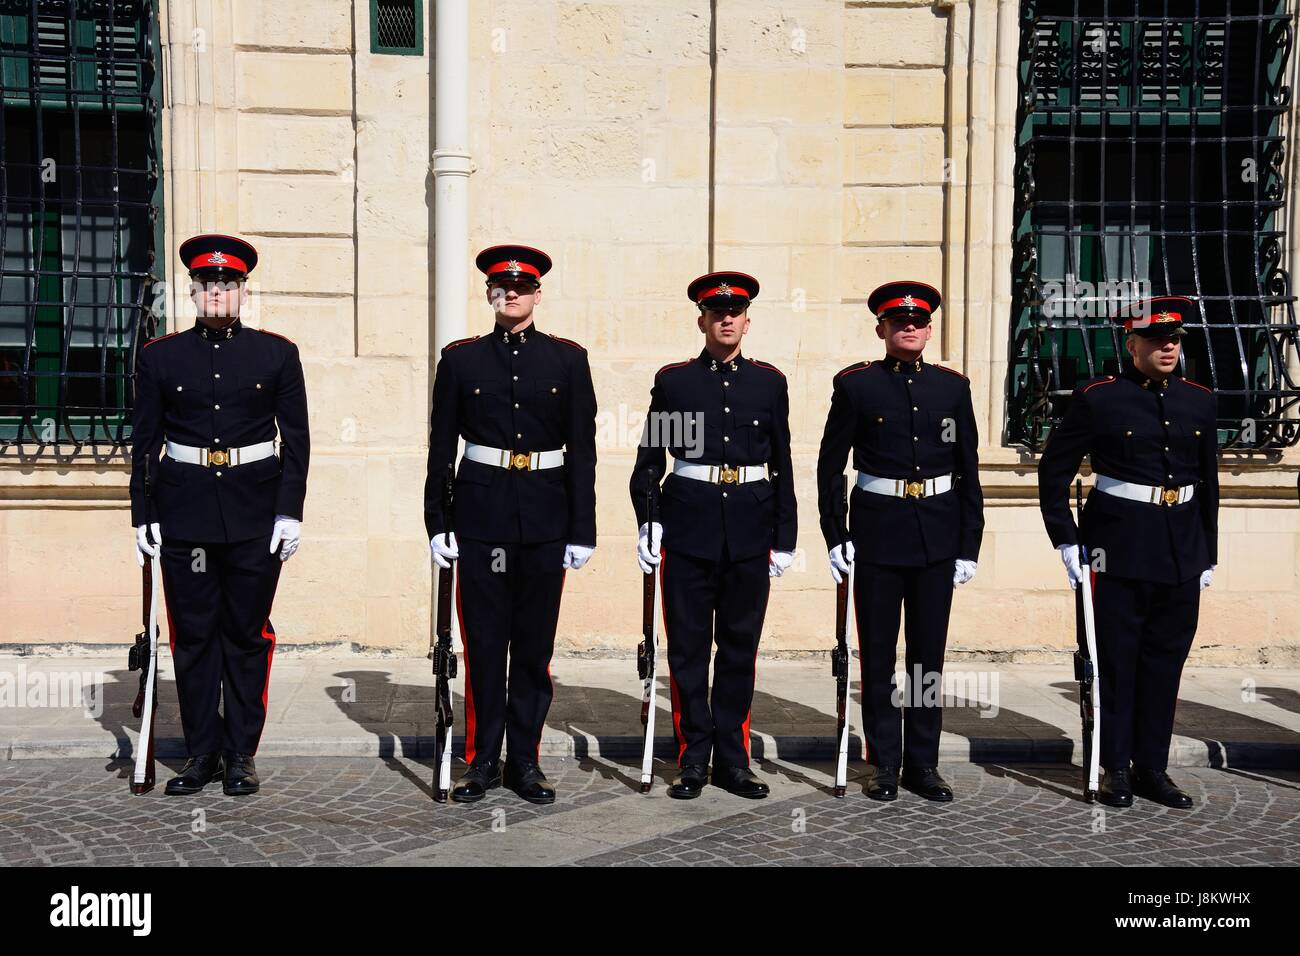 Uniformed soldiers on parade outside the Auberge de Castille for a European Union conference in Castille Square, Valletta, Malta, Europe. Stock Photo